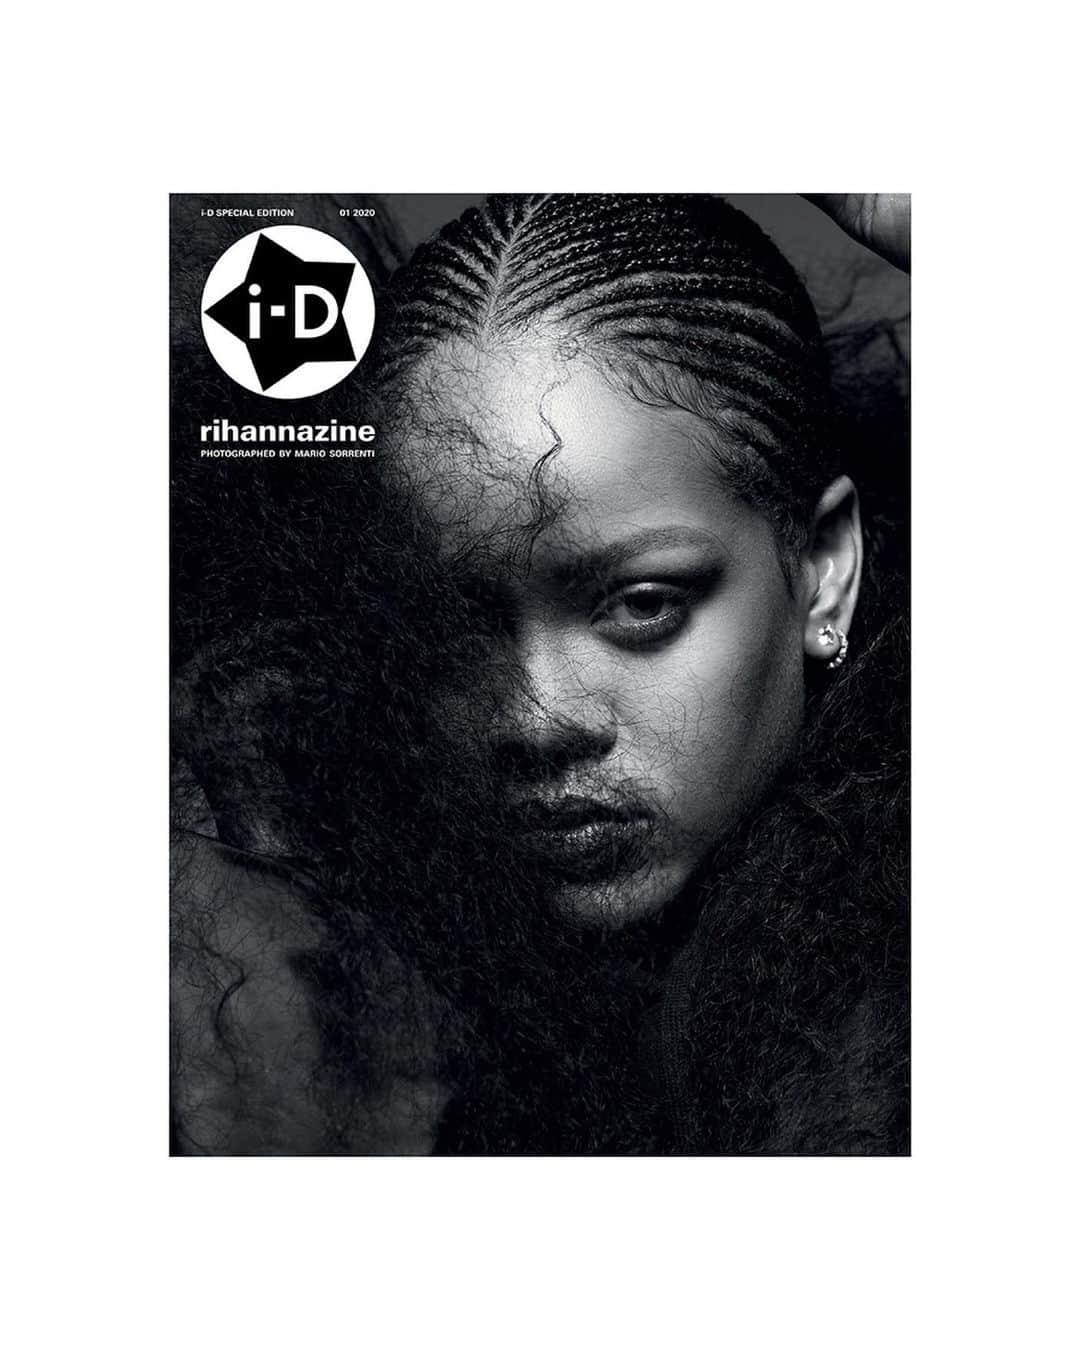 i-Dさんのインスタグラム写真 - (i-DInstagram)「🖤 HI @badgalriri! 🖤⁣⁣⁣ ⁣⁣⁣ To kick off the new decade and our 40th anniversary year, i-D and the global icon that is Rihanna have collaborated on a special, limited edition issue - titled ‘rihannazine’.⁣⁣⁣ ⁣⁣⁣ This visually-driven project is a celebration of incredible people, handpicked by Ri and i-D for their inspirational and progressive impact across culture, art, fashion and activism.⁣⁣⁣ ⁣⁣⁣ Stay tuned throughout the week as Rihanna takes over the i-D Instagram page, interviewing those leading the charge for change in⁣ 2020.⁣⁣⁣ ⁣⁣⁣⁣⁣ Hit the link in bio to preorder #rihannazine exclusively at i-Dstore.co⁣⁣⁣ 🛒⁣⁣⁣⁣ ⁣⁣⁣ [i-D SPECIAL EDITION 01 2020]⁣⁣⁣⁣⁣ .⁣⁣⁣⁣⁣⁣⁣⁣ .⁣⁣⁣⁣⁣⁣⁣⁣ Photography @mario_sorrenti⁣⁣⁣⁣⁣⁣⁣⁣ Editor-In-Chief & styling @alastairmckimm⁣⁣⁣⁣⁣⁣⁣⁣ Creative Director @lauragenninger @studio191ny⁣⁣ Casting director @samuel_ellis⁣⁣⁣⁣⁣⁣⁣ Hair creative director @yusefhairnyc⁣⁣⁣⁣⁣⁣⁣ Hair @naphiisbeautifulhair⁣⁣⁣⁣⁣⁣⁣⁣ Make-up Kanako Takase⁣⁣⁣⁣⁣⁣⁣⁣ Nail technician @jennynails at @clmagency using CHANEL Les Vernis and CHANEL La Crème Main.⁣ Set design @emmaroachstudio at @streetersagency.⁣ Full credits on i-D.co⁣⁣ @badgalriri wears @fenty⁣⁣⁣⁣⁣ #Rihanna #Fenty⁣⁣⁣」1月20日 23時30分 - i_d